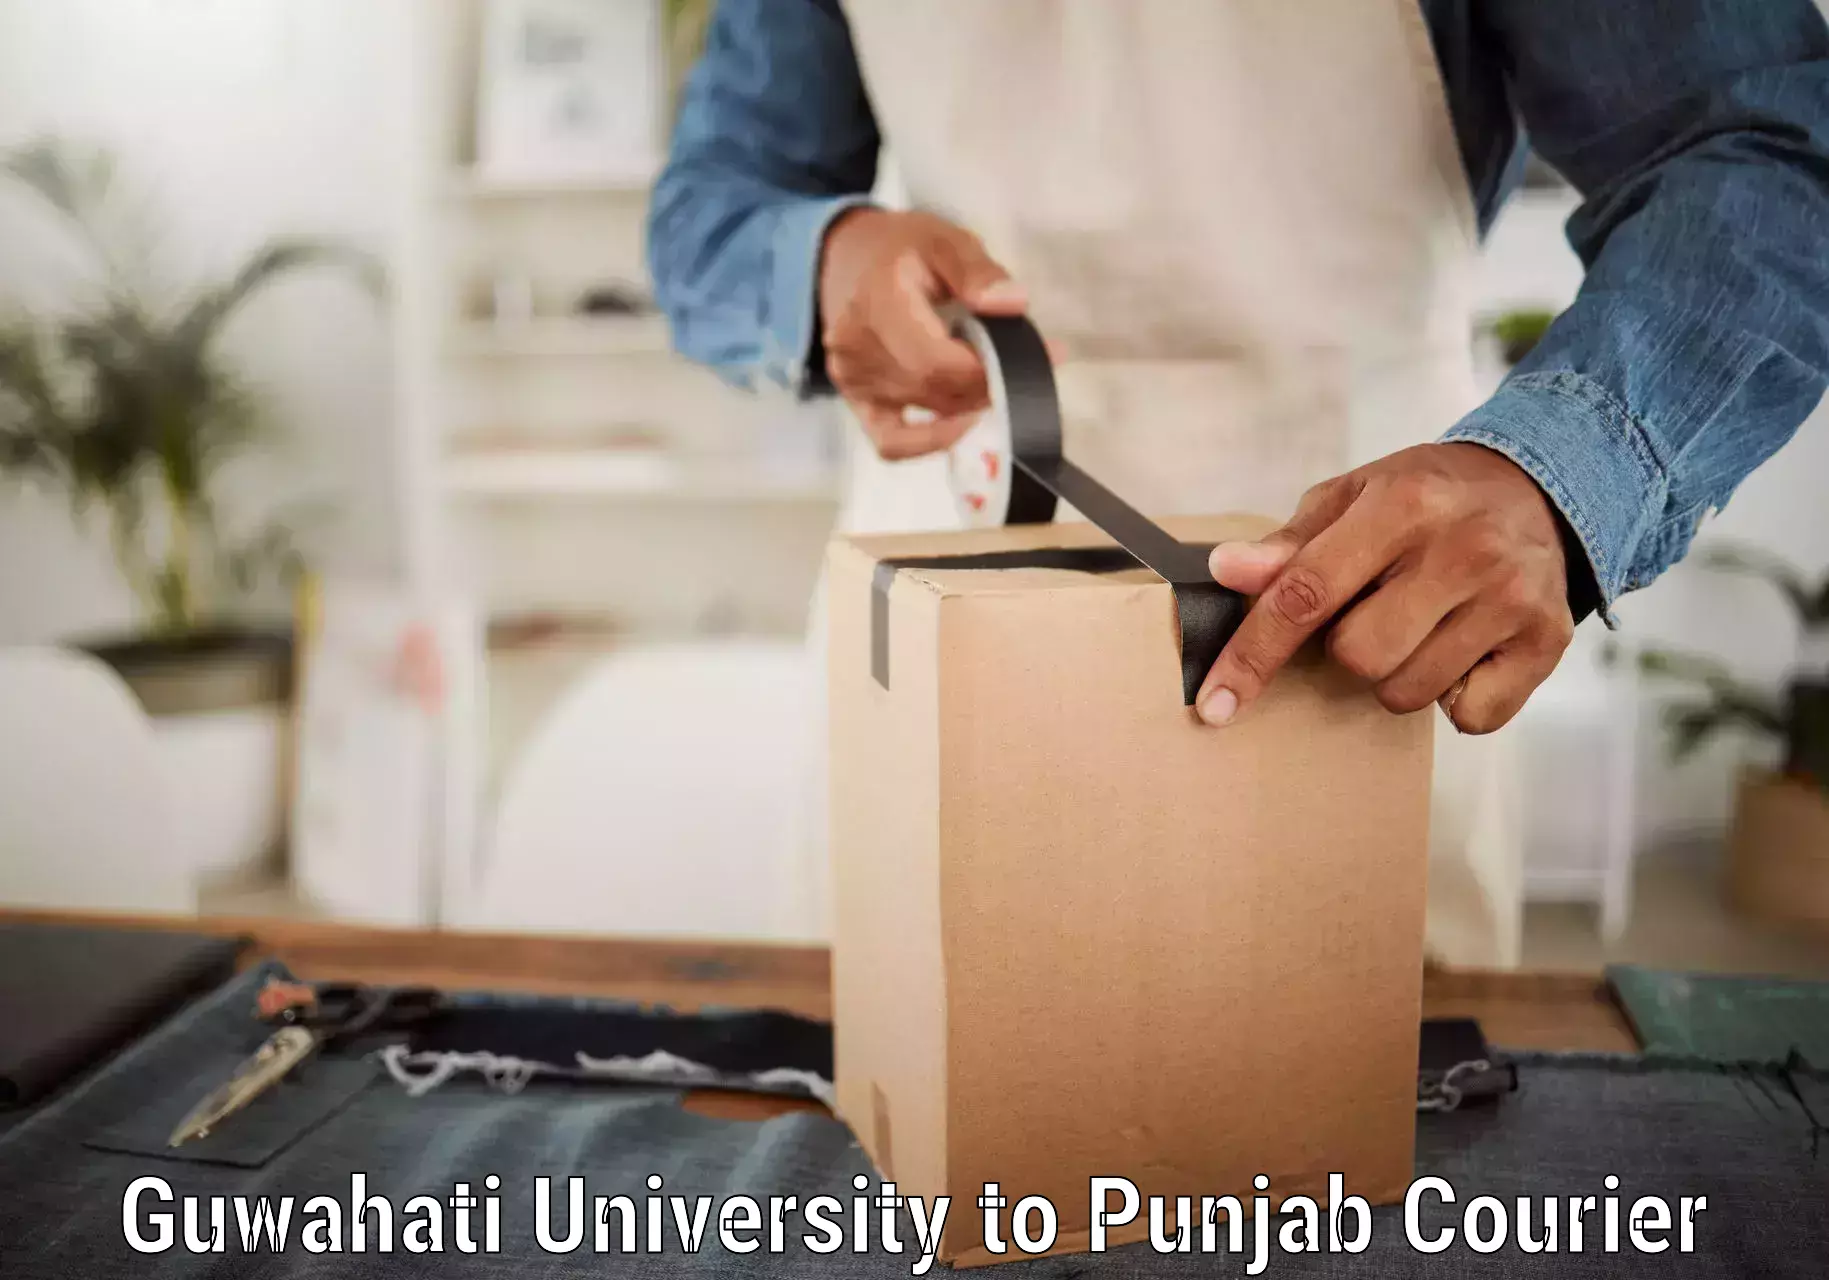 Courier app in Guwahati University to Patiala